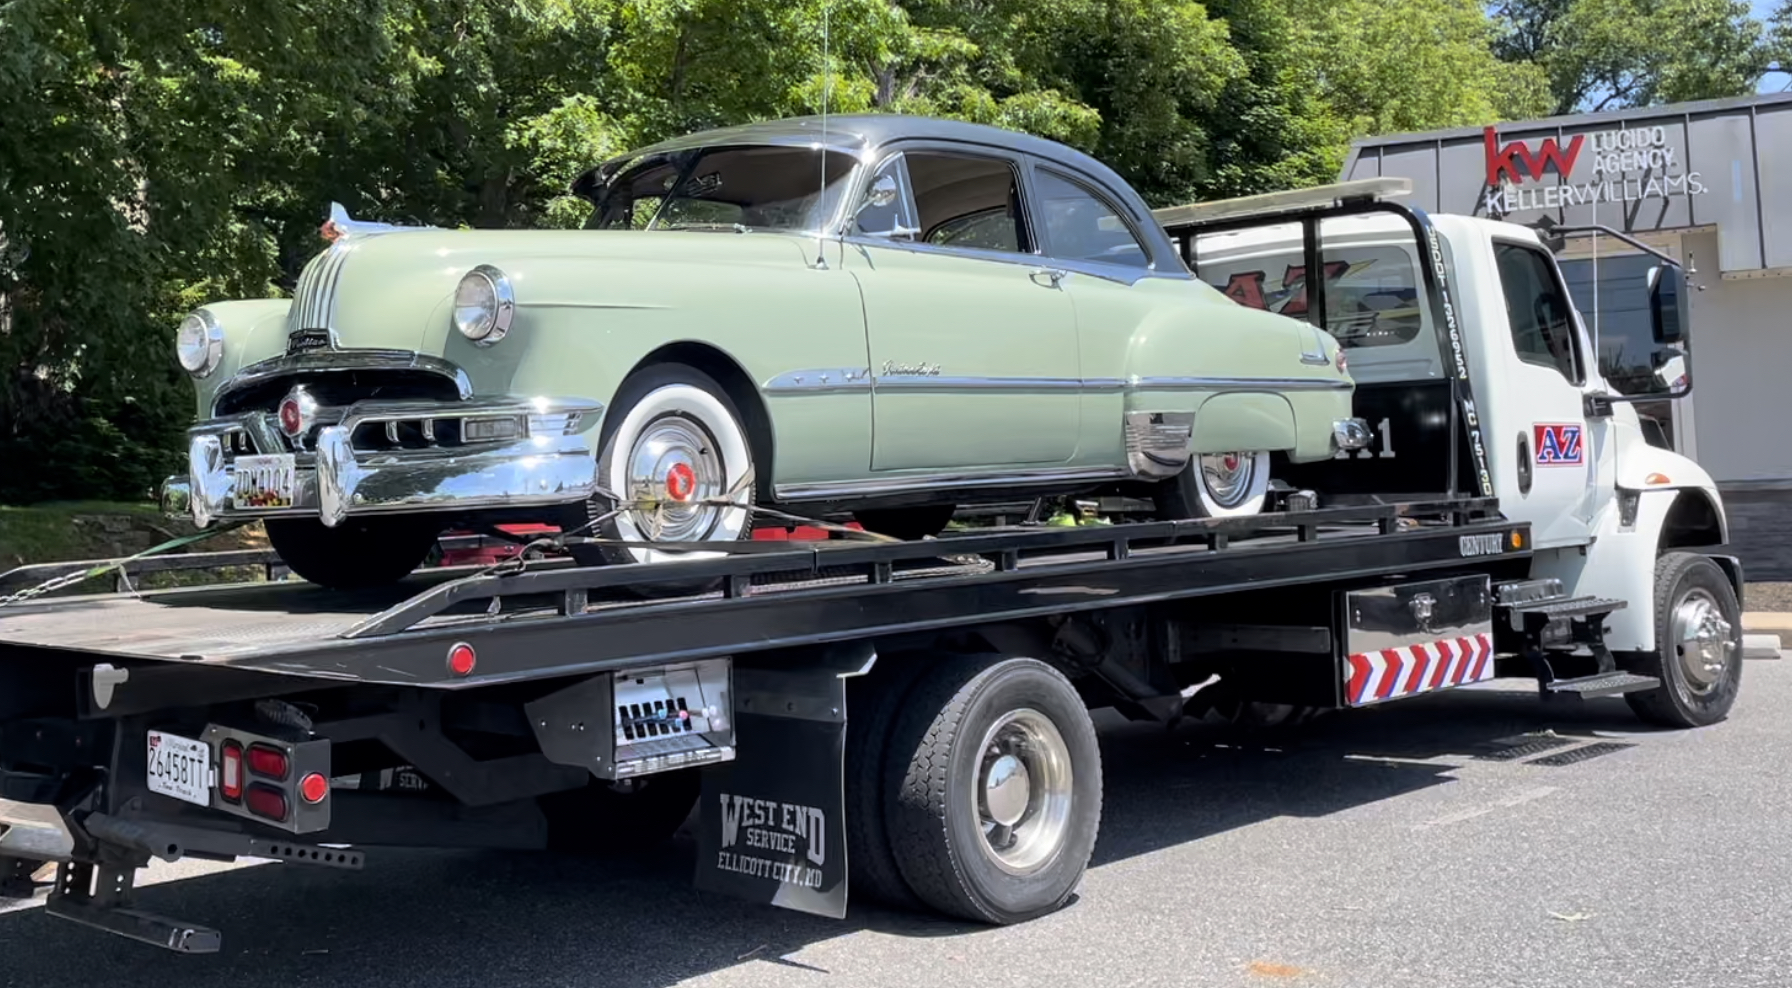 1951 Pontiac loaded on tow truck